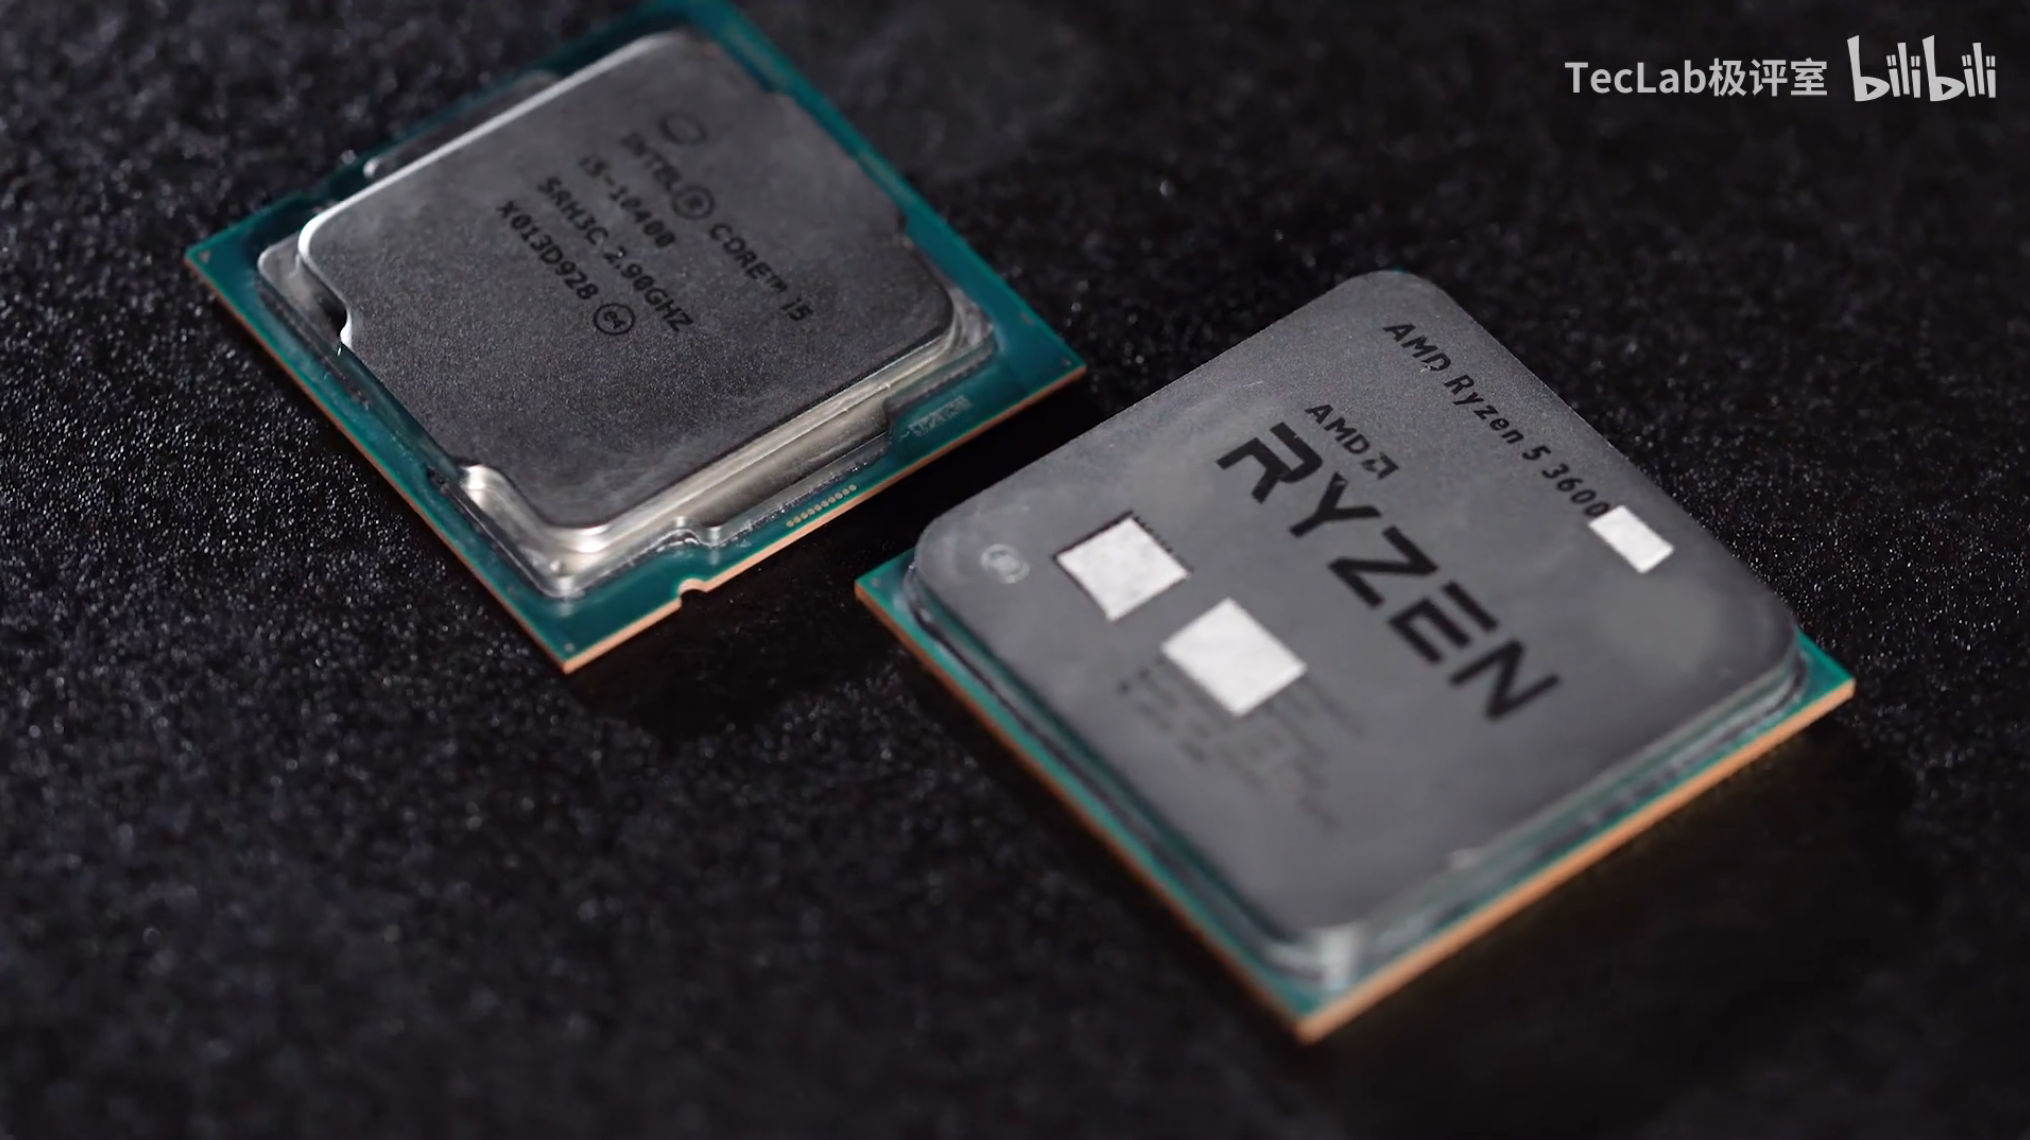 AMD Ryzen 5 3600XT CPU Benchmarked Against Intel Core i5-10400, Matches